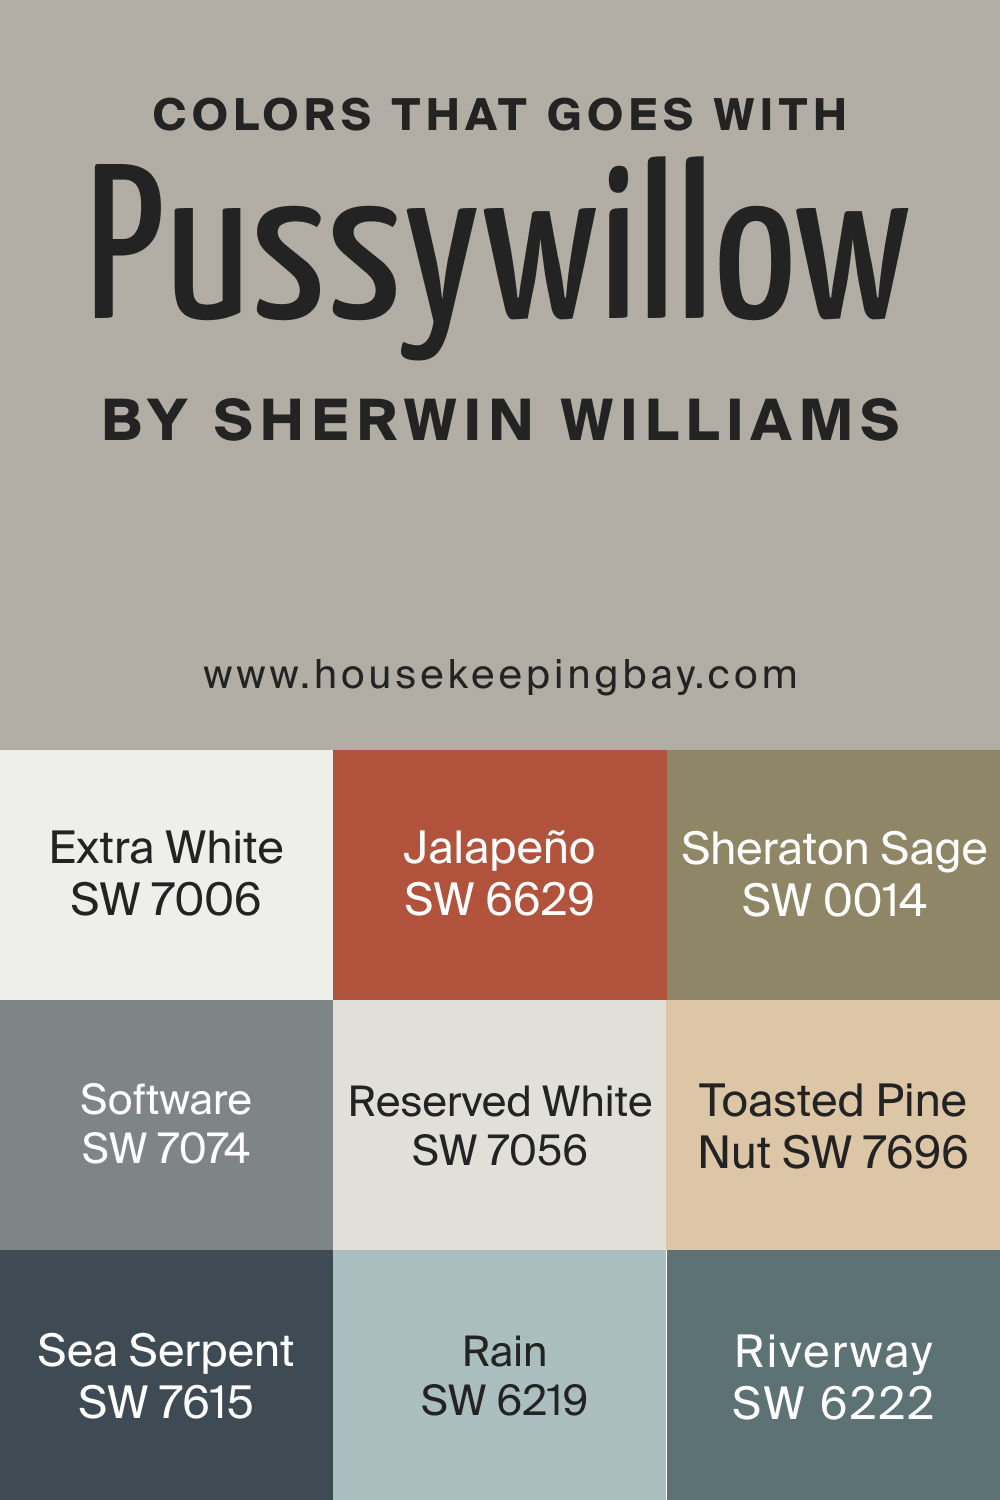 Colors that goes with Pussywillow SW 7643 by Sherwin Williams